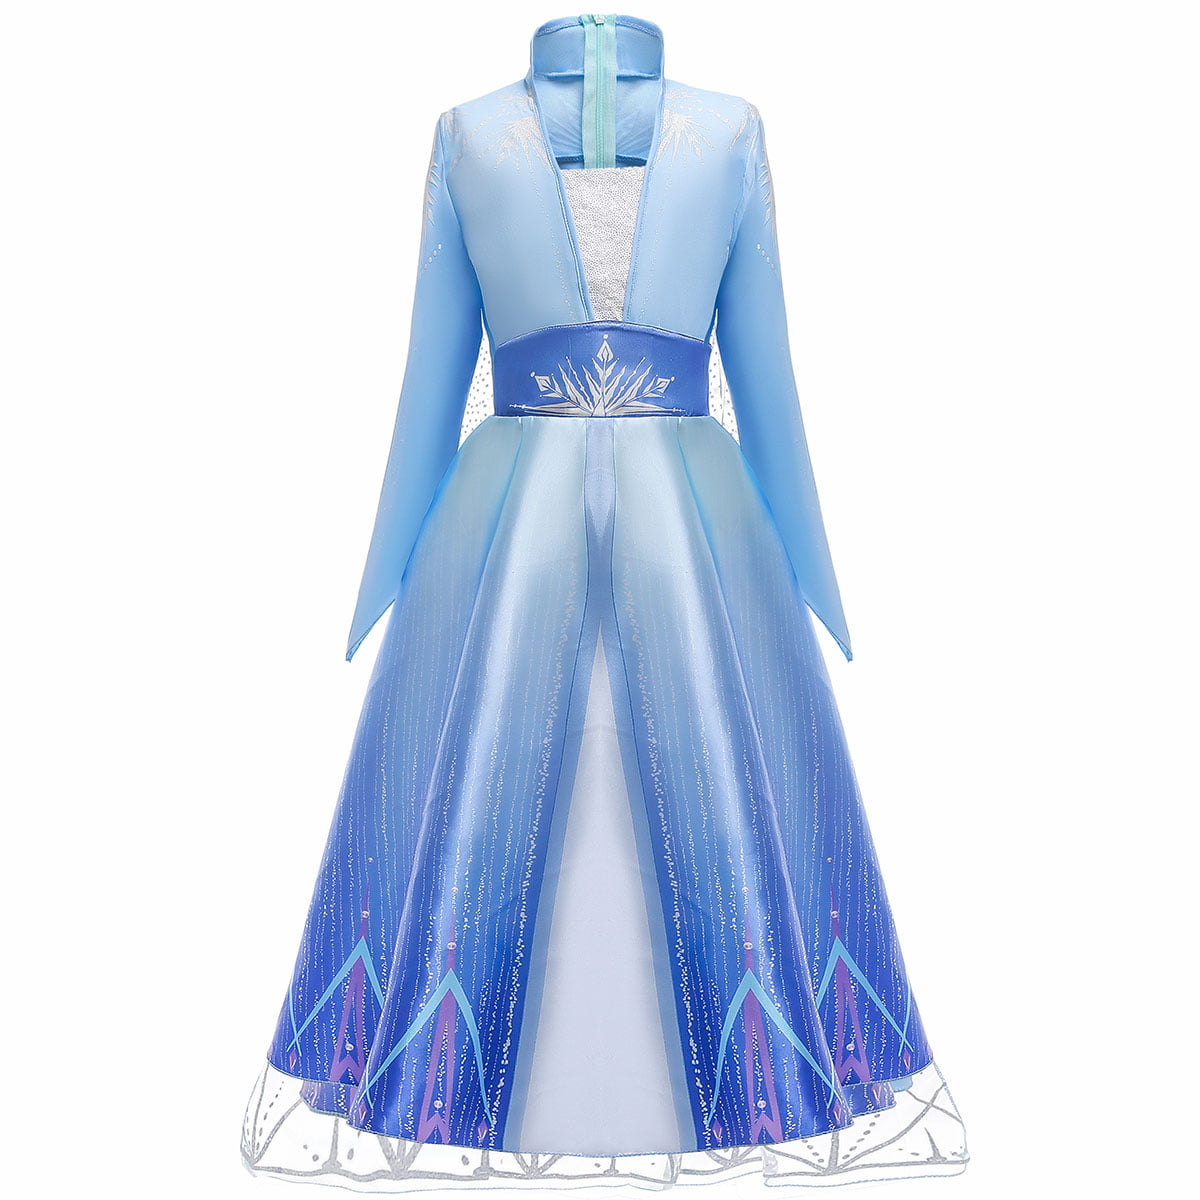 Kids Princess Elsa Anna Dresses for Girls Unicorn Cosplay Costume Party Clothing 